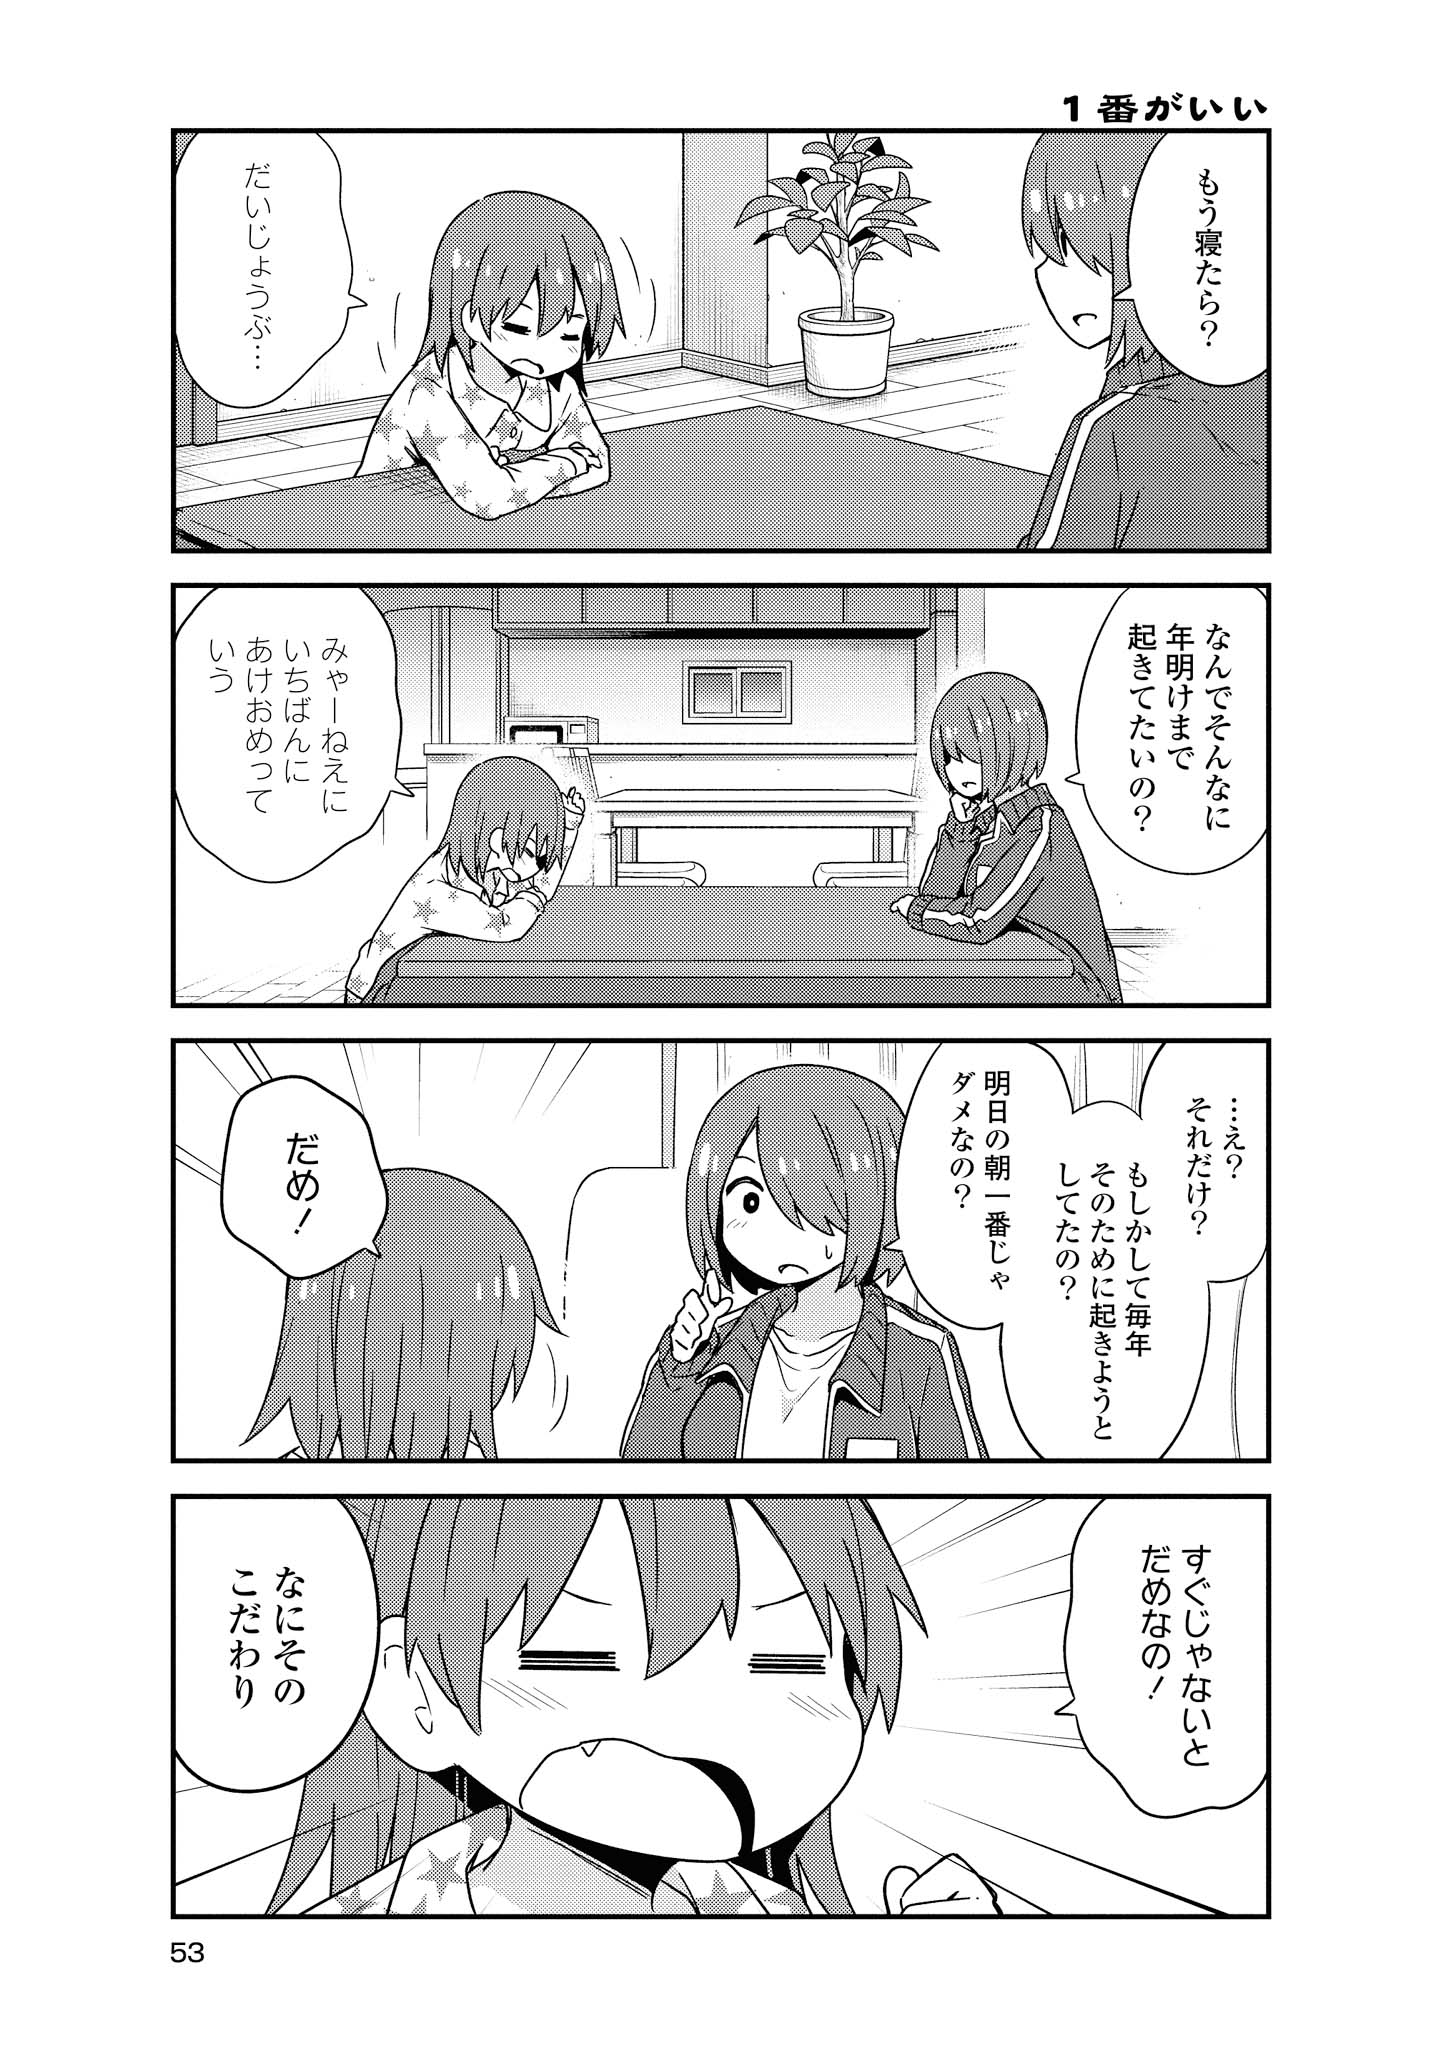 Wataten! An Angel Flew Down to Me 私に天使が舞い降りた！ 第46話 - Page 11